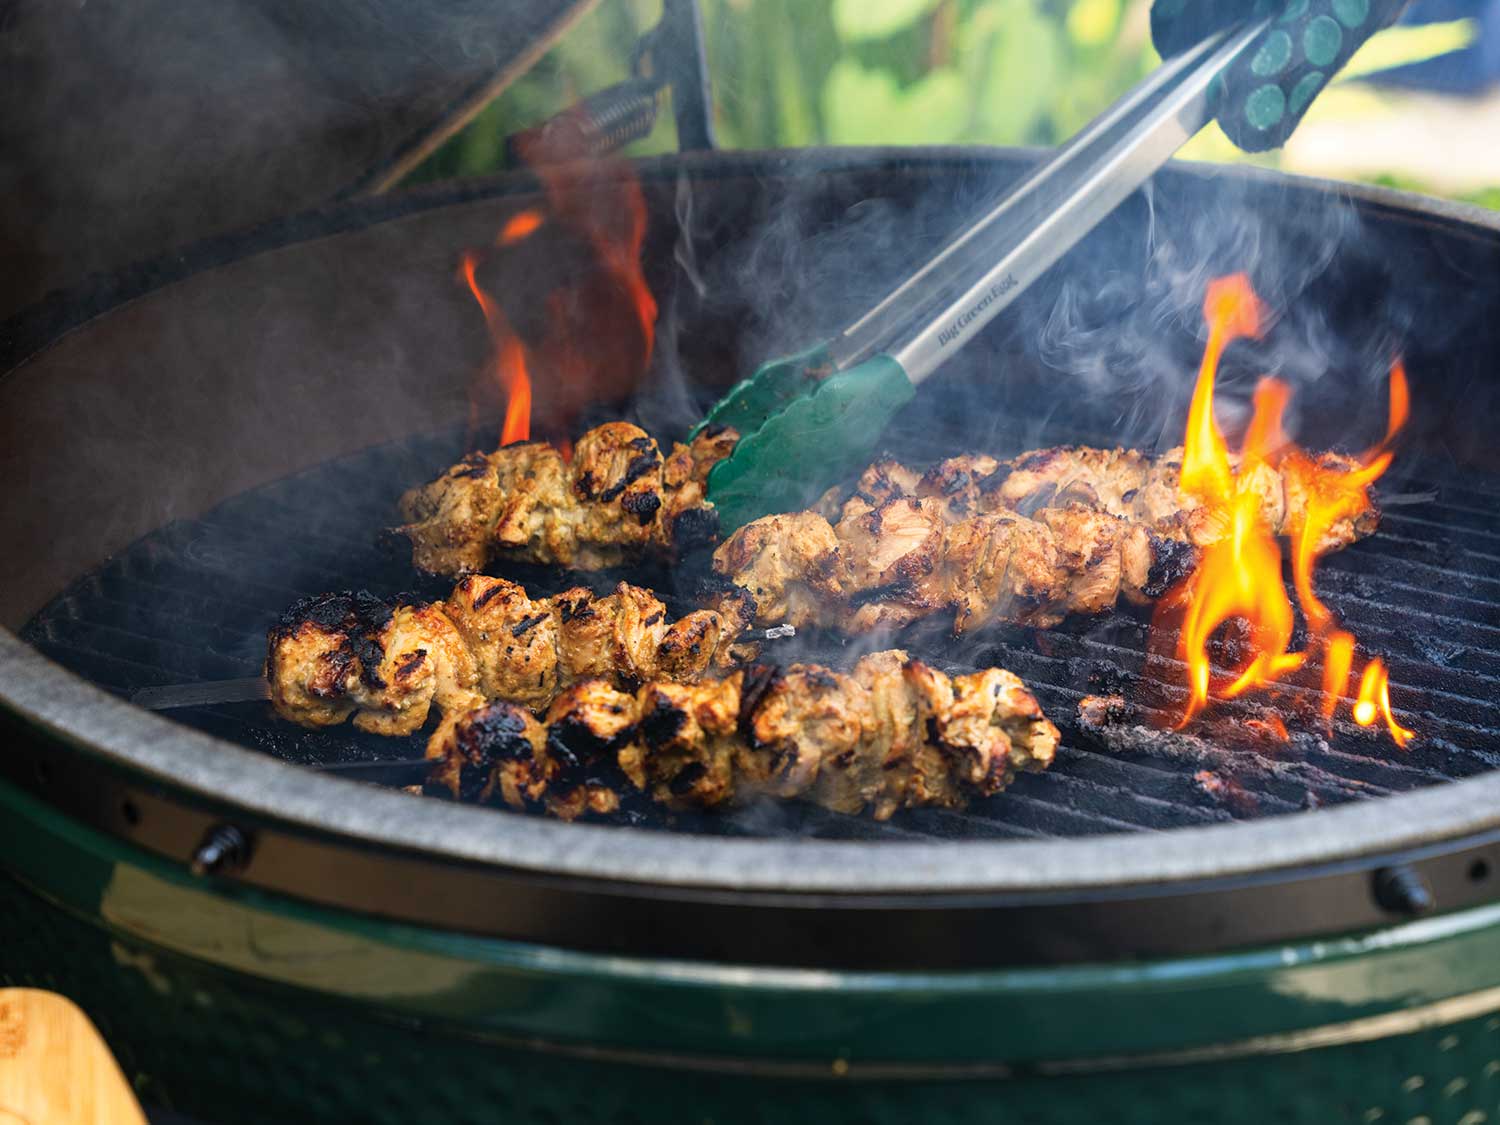 Chicken kebob skewers being seared over a flame inside a Big Green Egg grill.